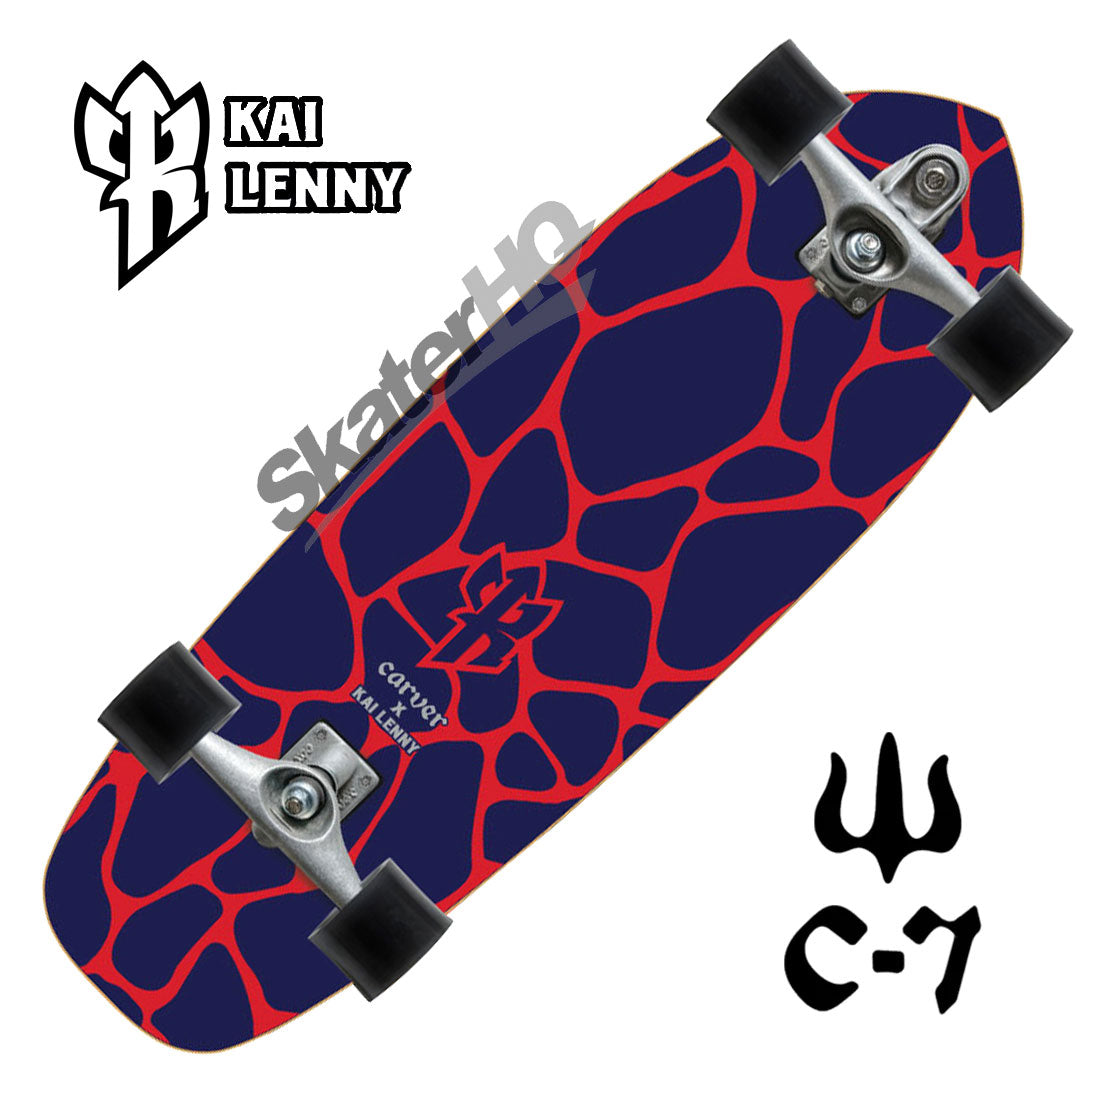 Carver x Kai Lenny Lava 31 C7 Raw Complete Skateboard Compl Carving and Specialty